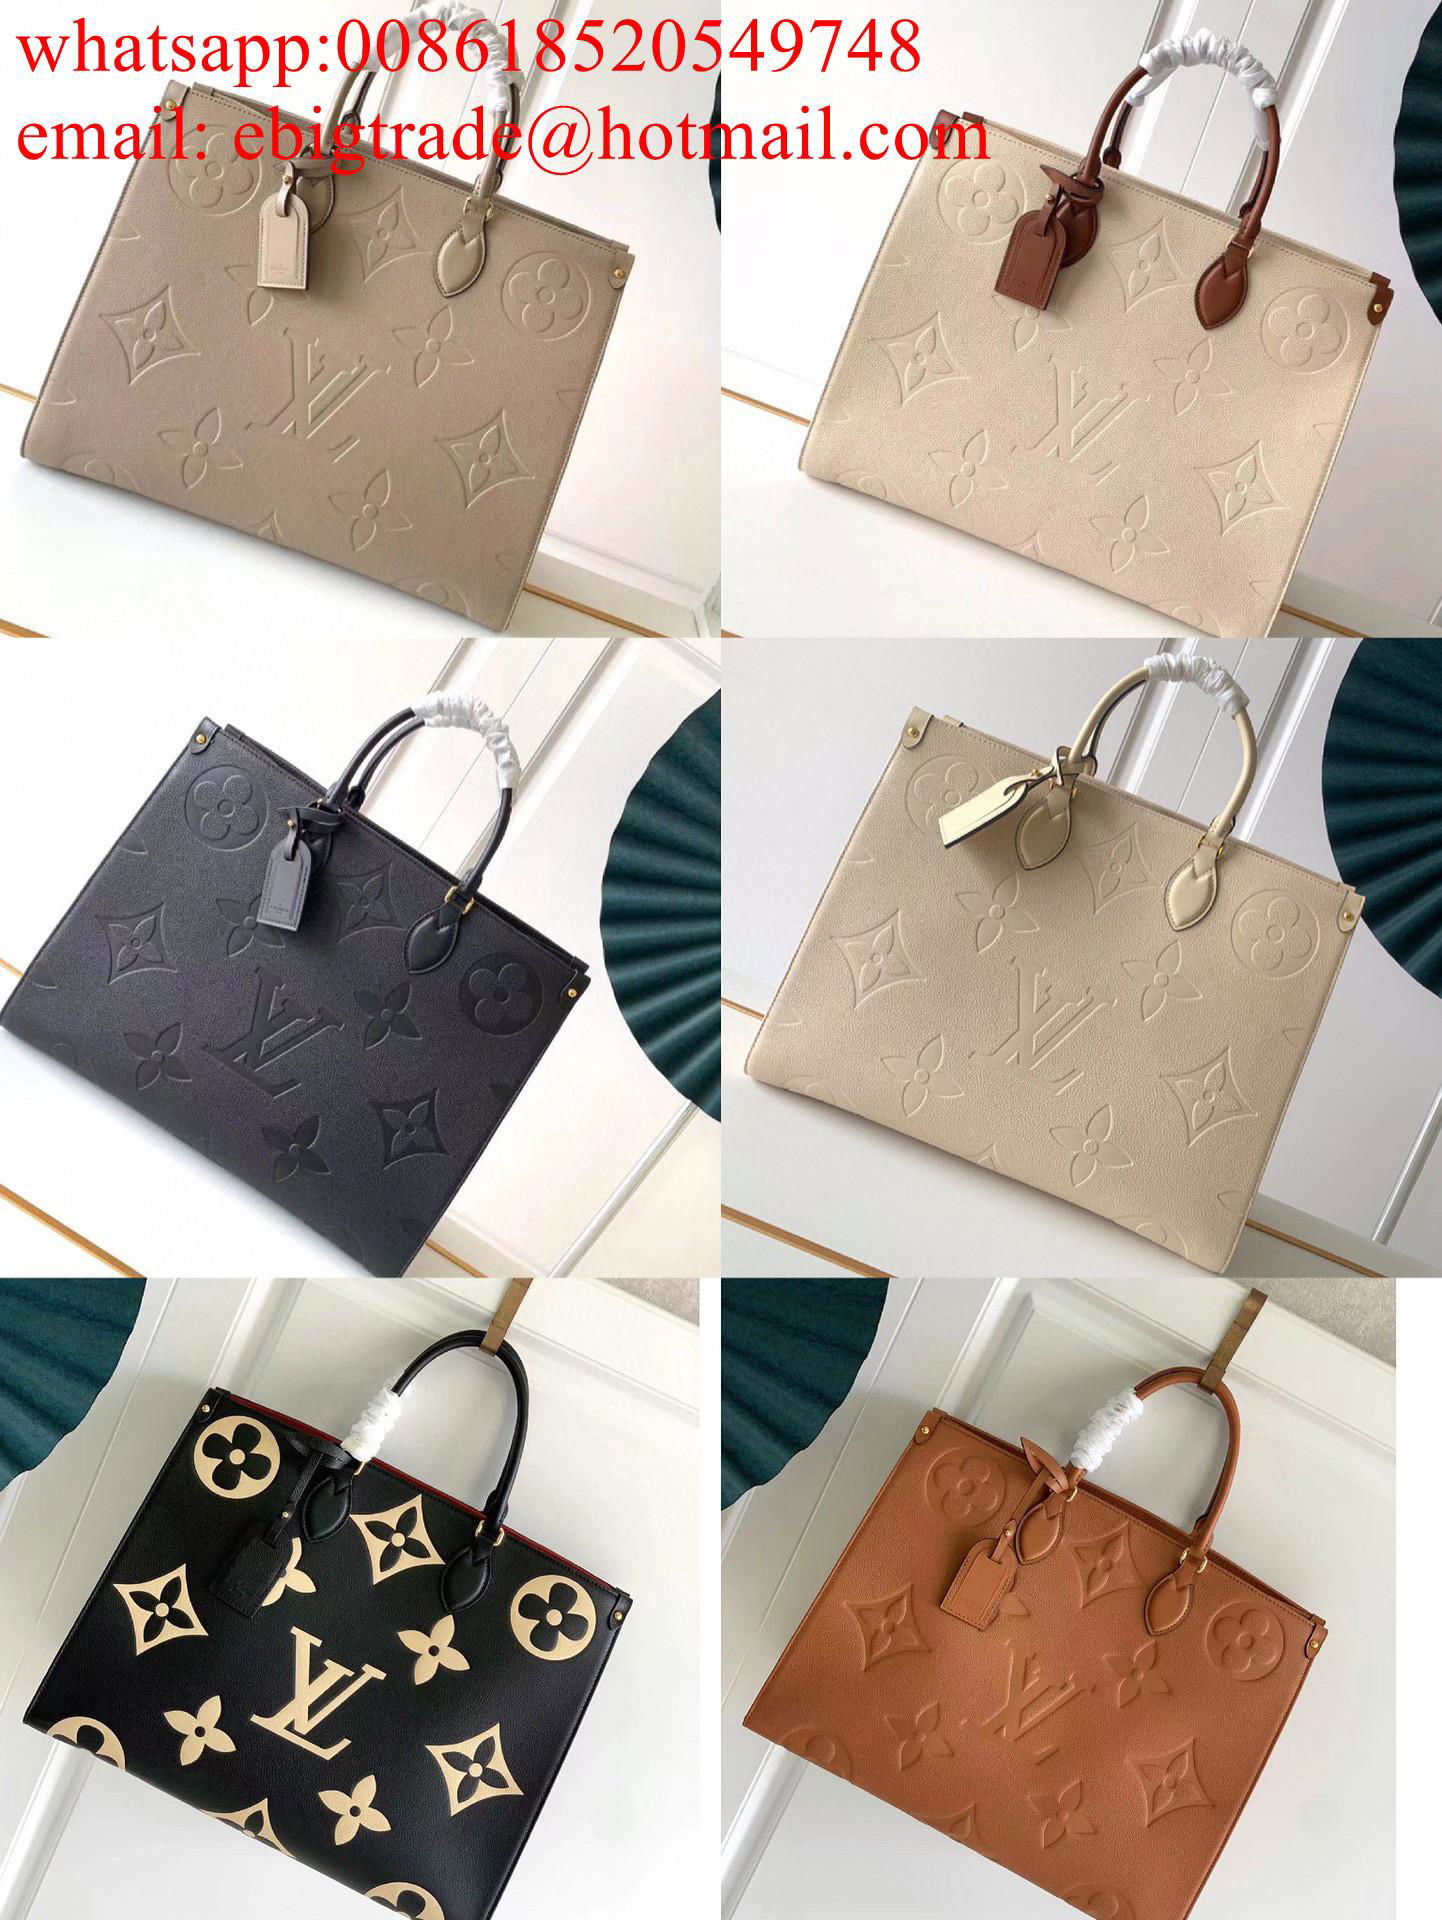 Wholesale               handbags on sale Cheap     andbags discount     ags  4